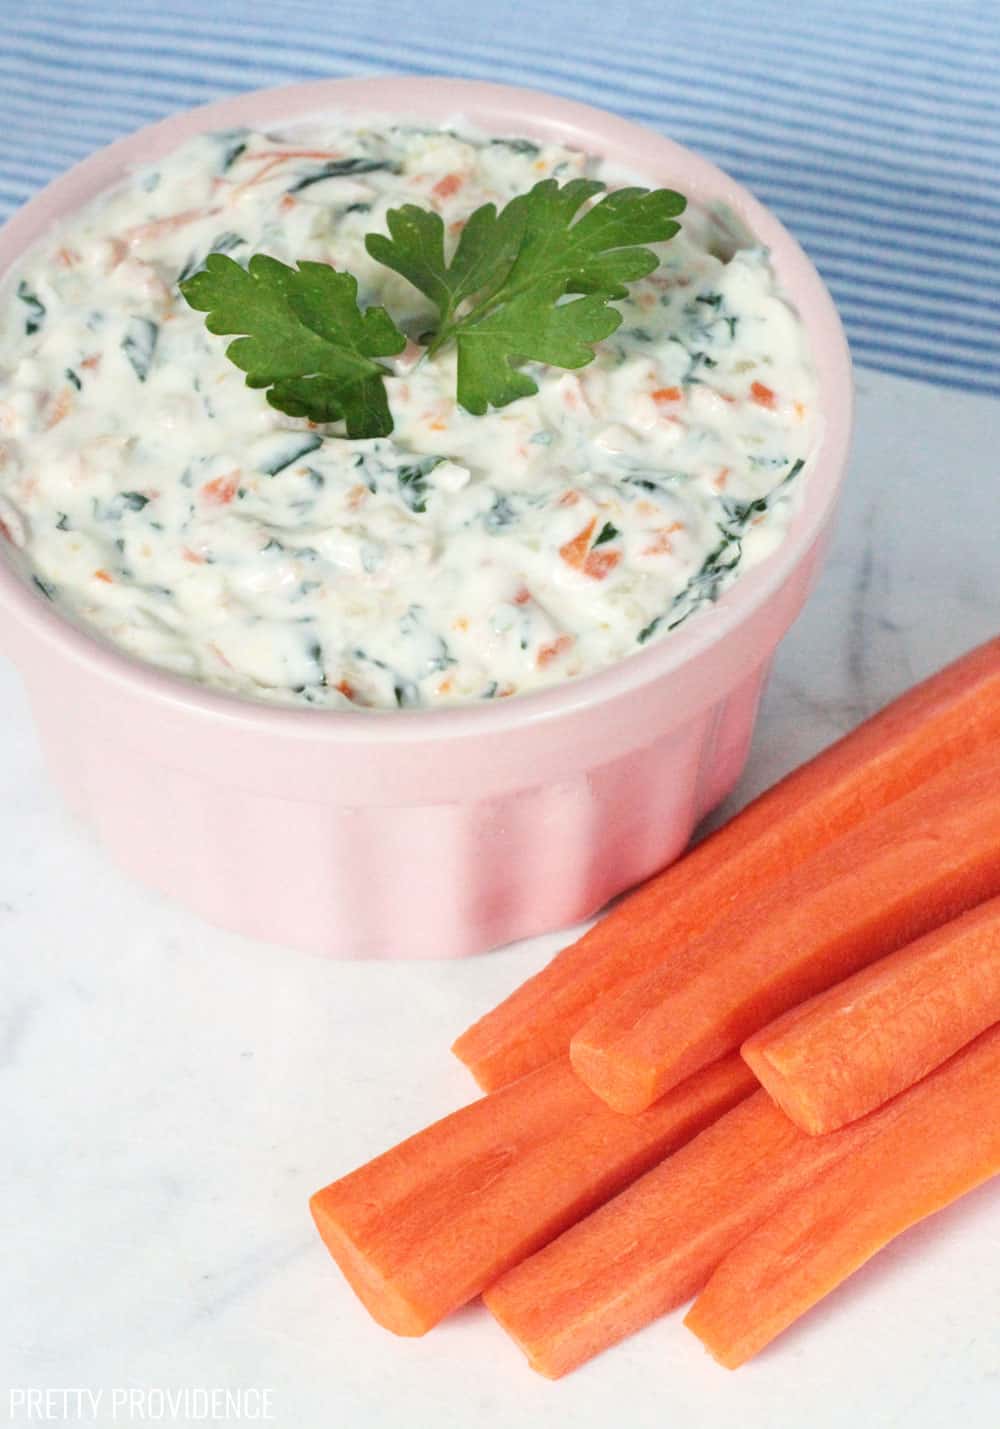 Sliced carrots with healthy veggie dip in a pink bowl with parsley as a garnish.